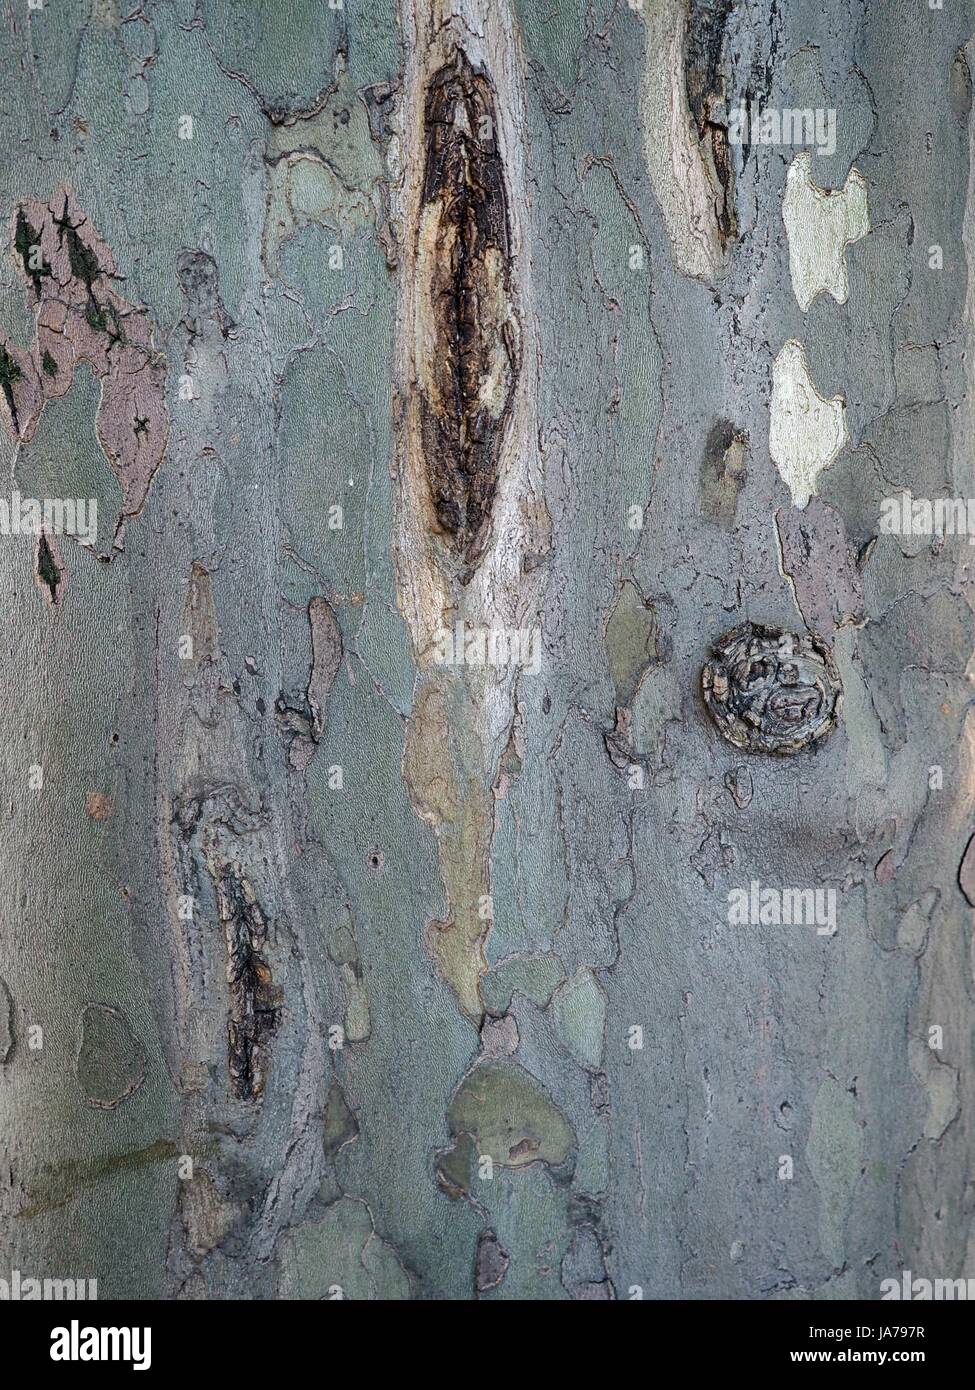 Bright white, blue tree bark texture with knots, discoloration and cracks for ads, advertisements or mock up. Stock Photo